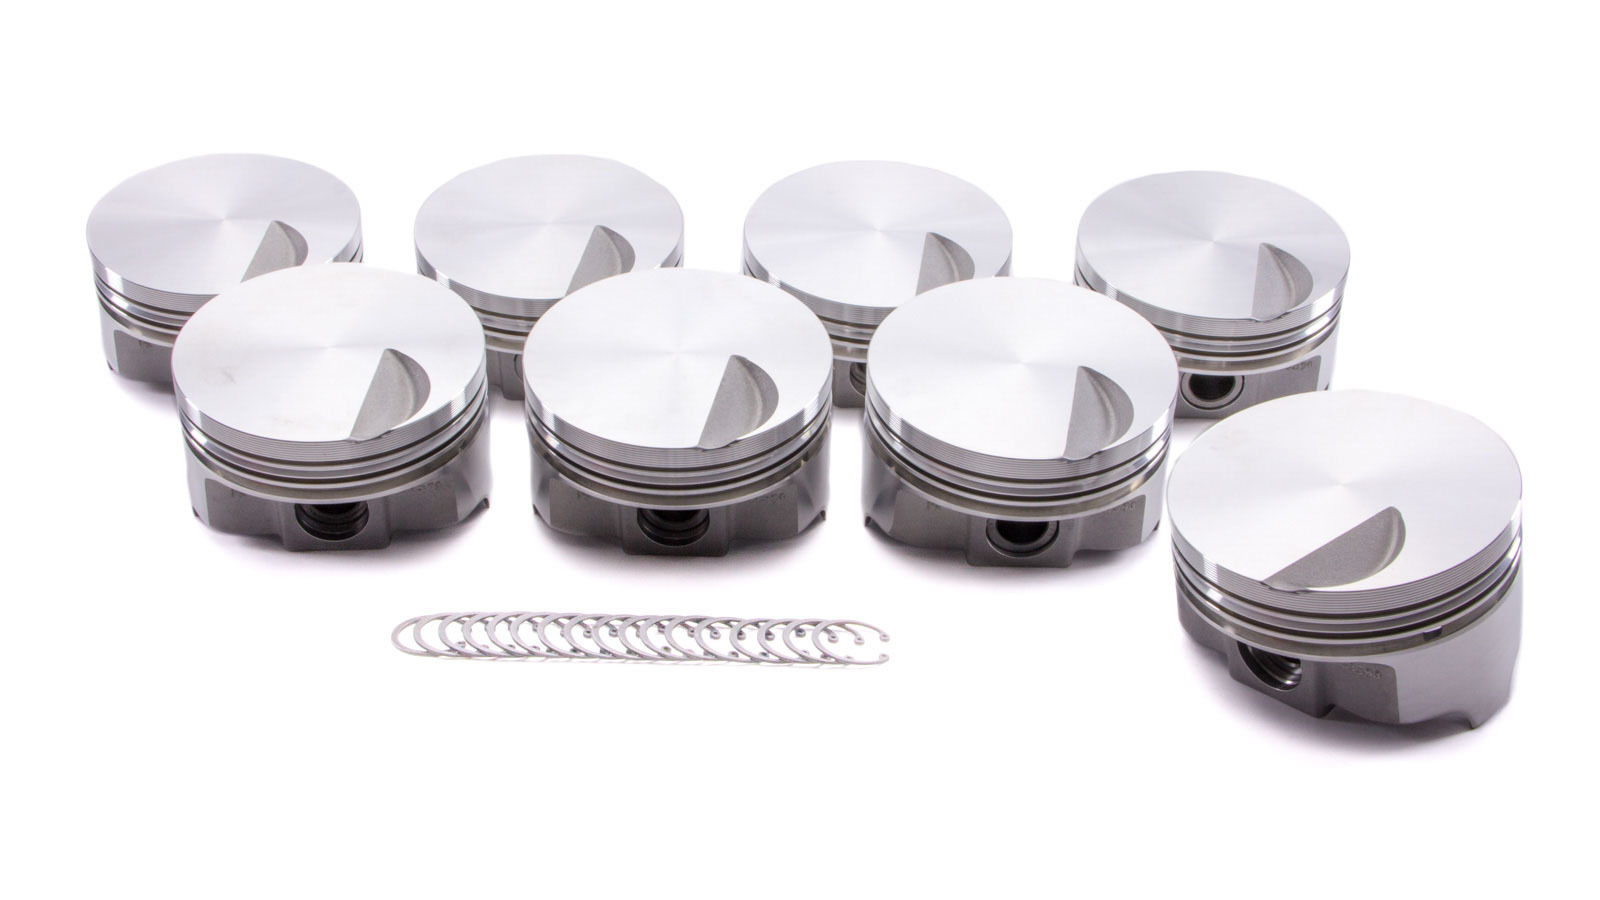 Icon Pistons IC9920.030 Piston, FHR Forged, Forged, 4.280 in Bore, 5/64 x 5/64 x 3/16 in Ring Grooves, Minus 3.00 cc, Big Block Chevy, Set of 8